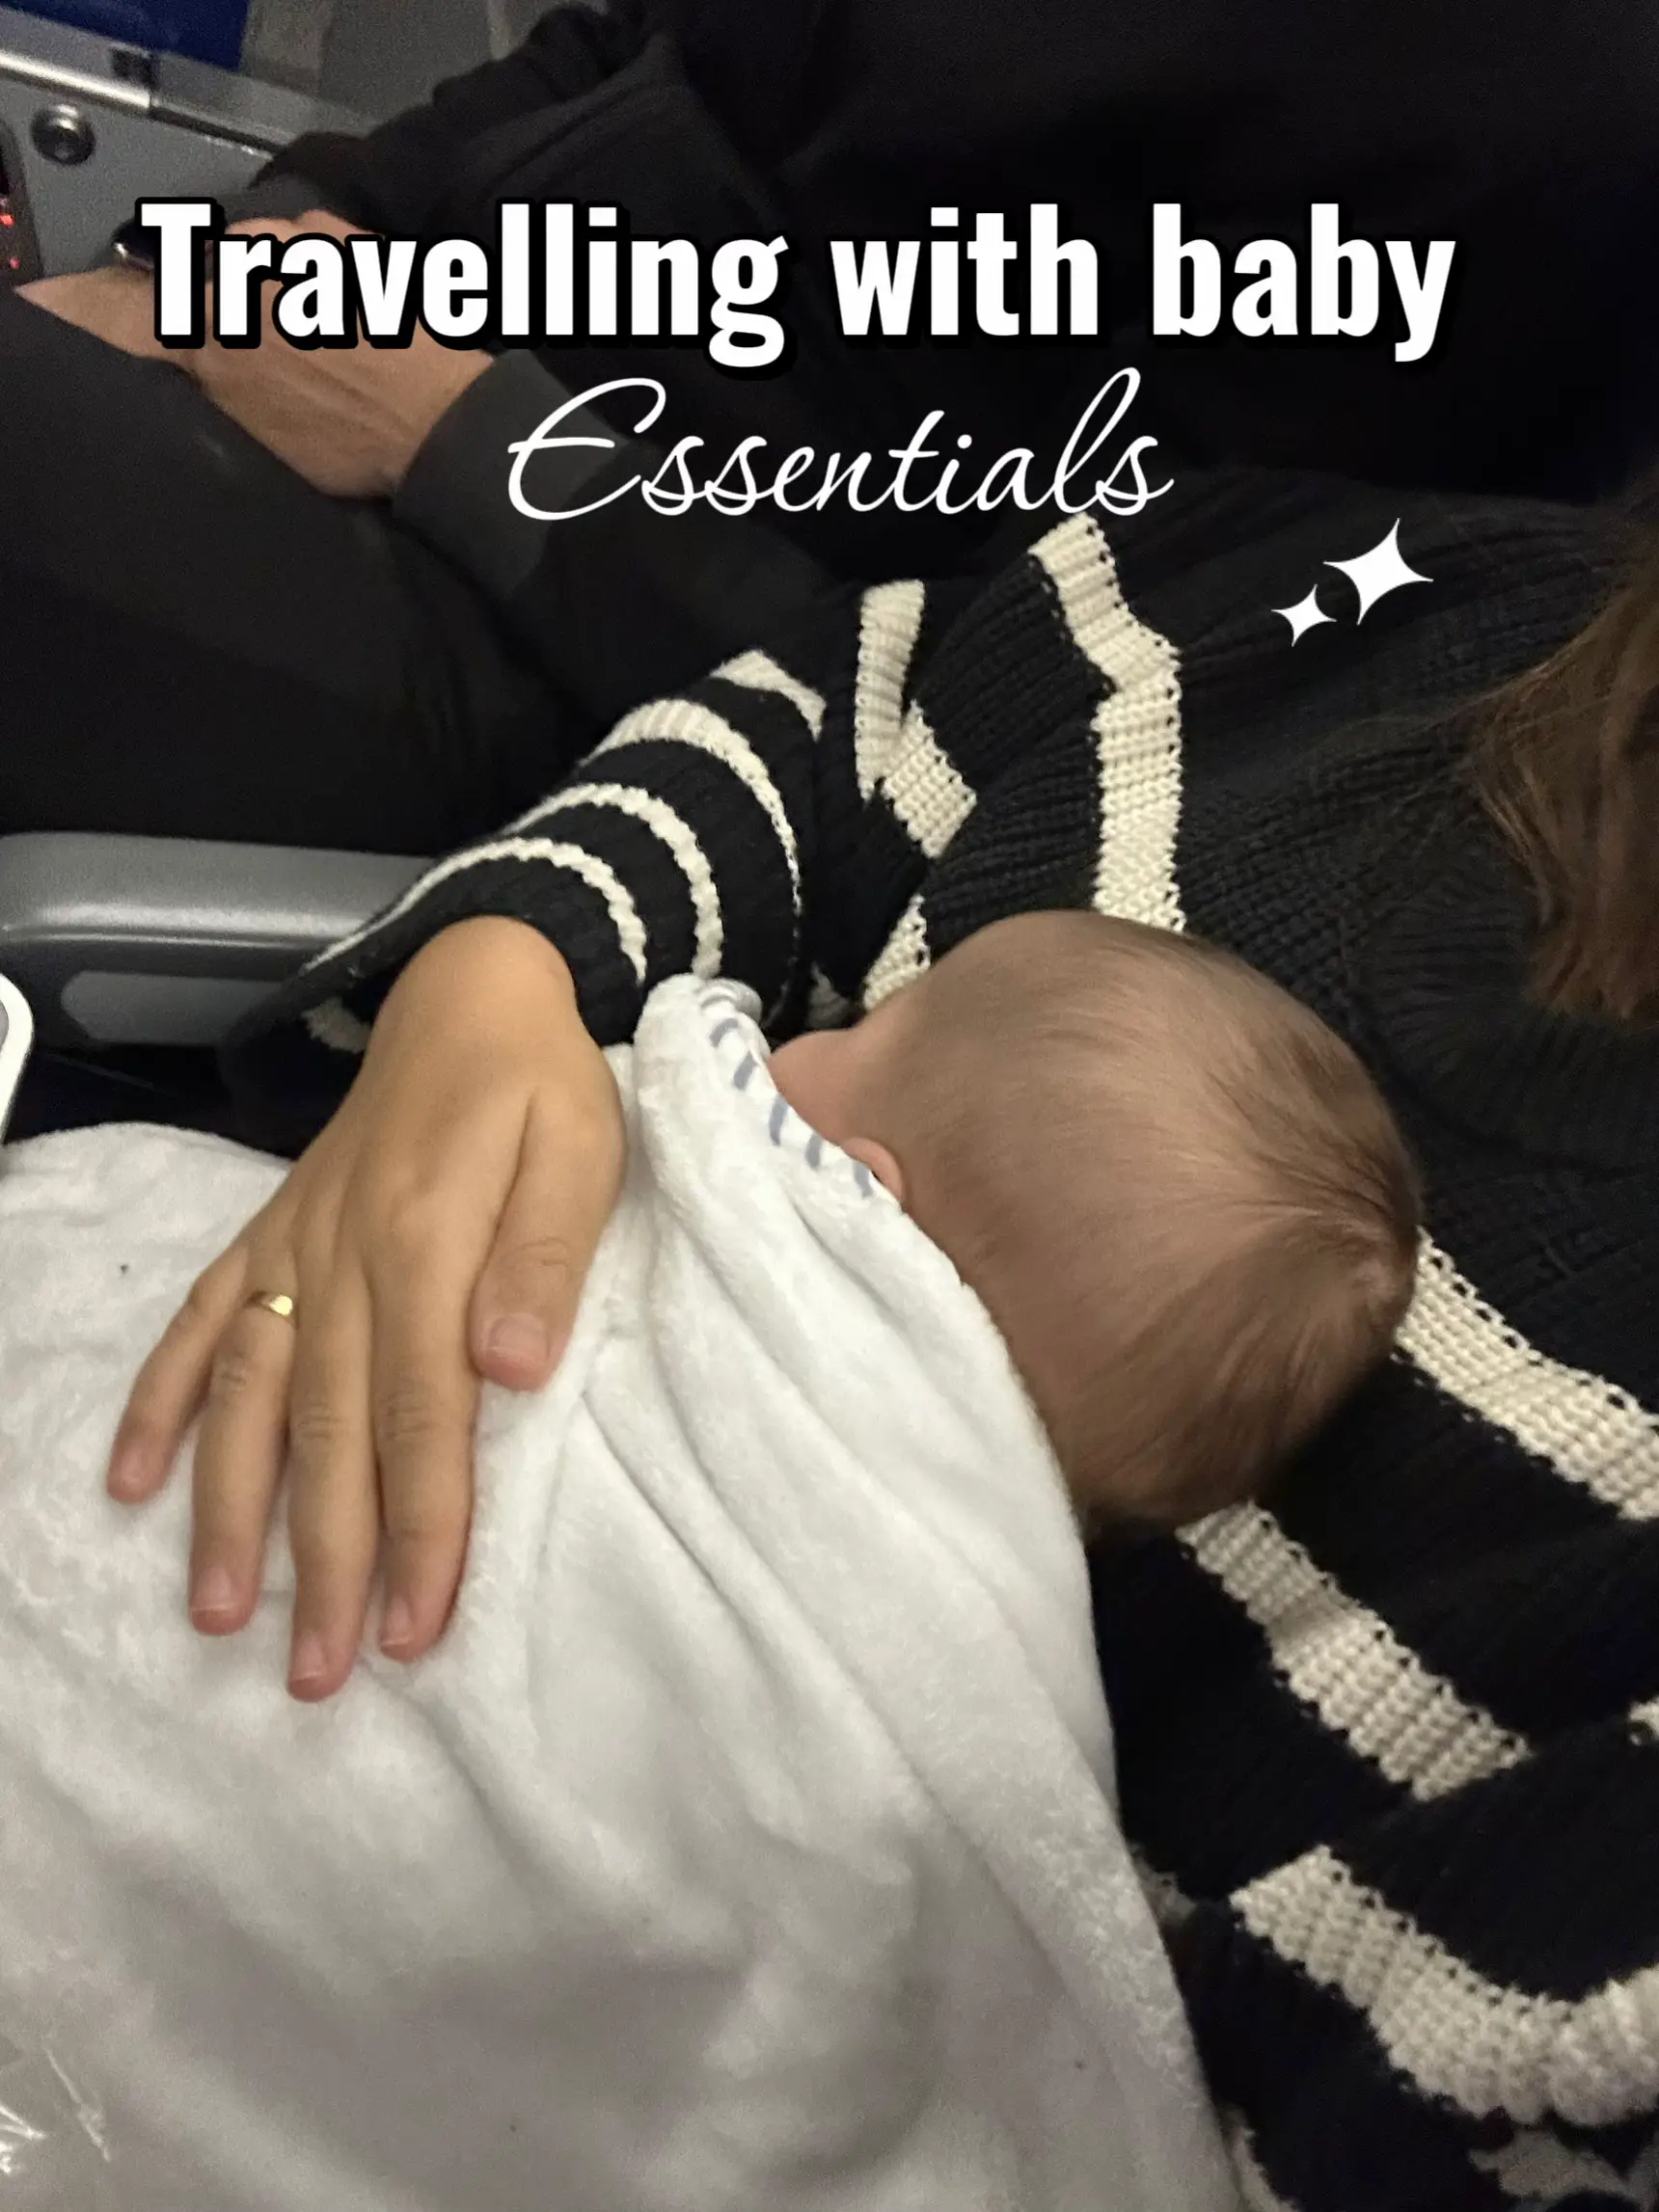 Keeping Baby Comfortable During Travel - Lemon8 Search